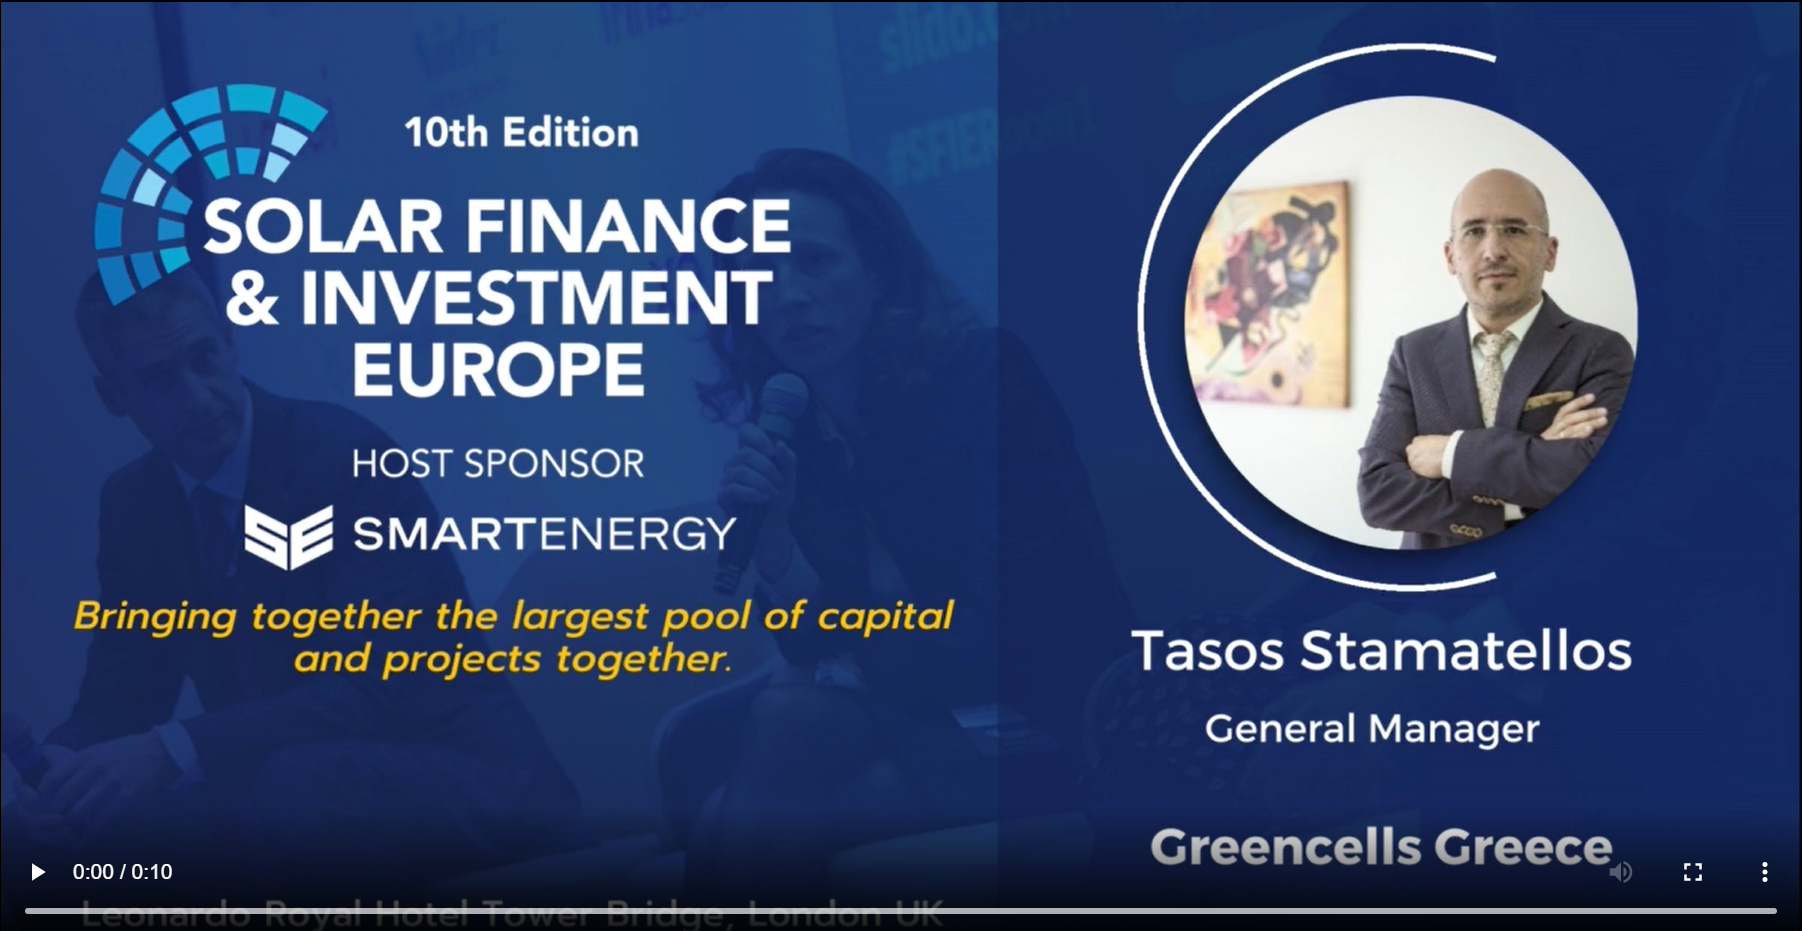 Greencells joining panel discussion at this year’s Solar Finance & Investment Europe